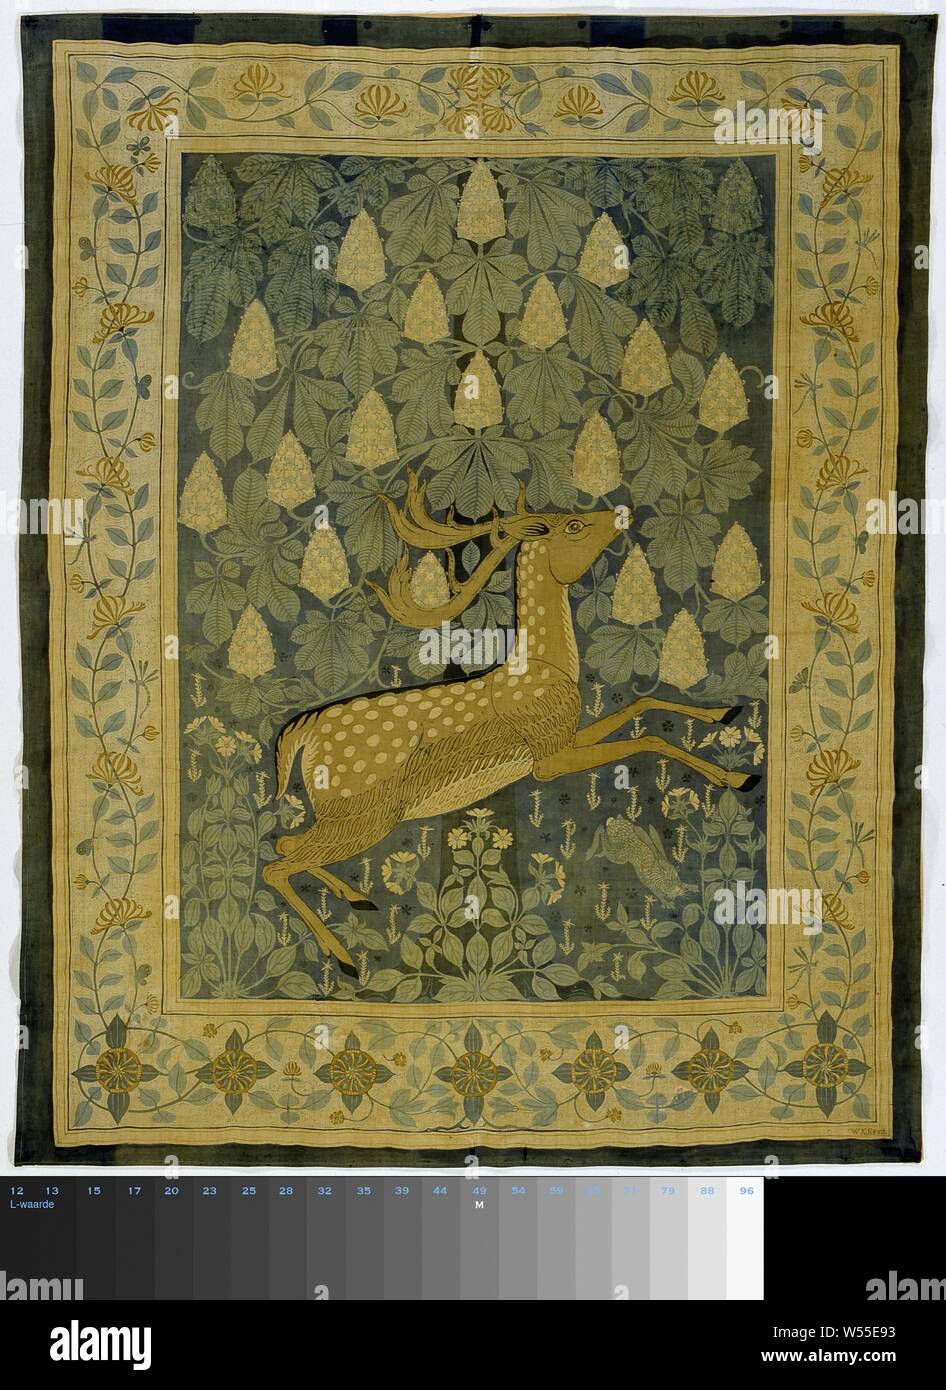 Tapestry with jumping deer against a background of flowering chestnuts, Batik linen cloth in blue green, blue and brown yellow on an ecru ground. Presentation: flowering chestnut including a fallow deer and a rabbit among flowering wild plants (phlox, wall pepper). On the outside a broad edge of honeysuckle with dragonflies and butterflies. Signed., Willem Karel Rees (signed by artist), Haarlem, c. 1902 - c. 1909, cotton (textile), l 132 cm × w 105 cm Stock Photo